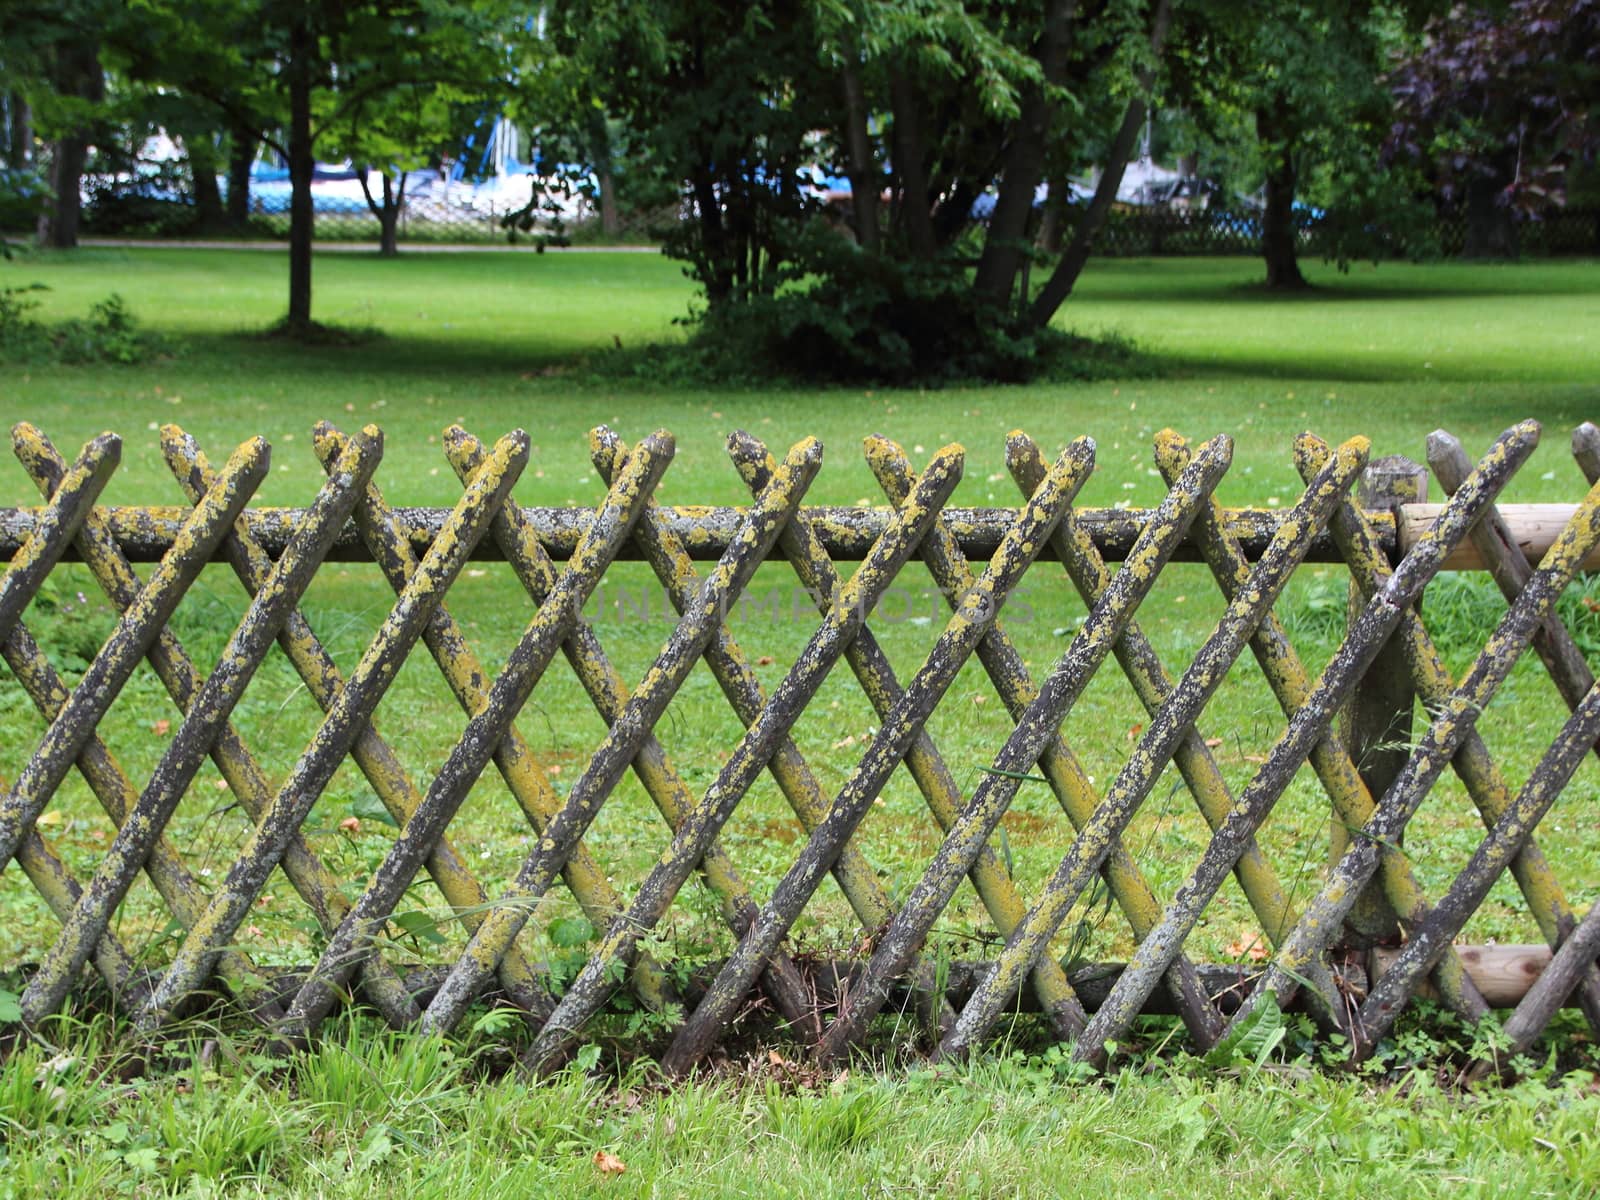 Worn Wooden Fence with Alga at Grass Field by HoleInTheBox